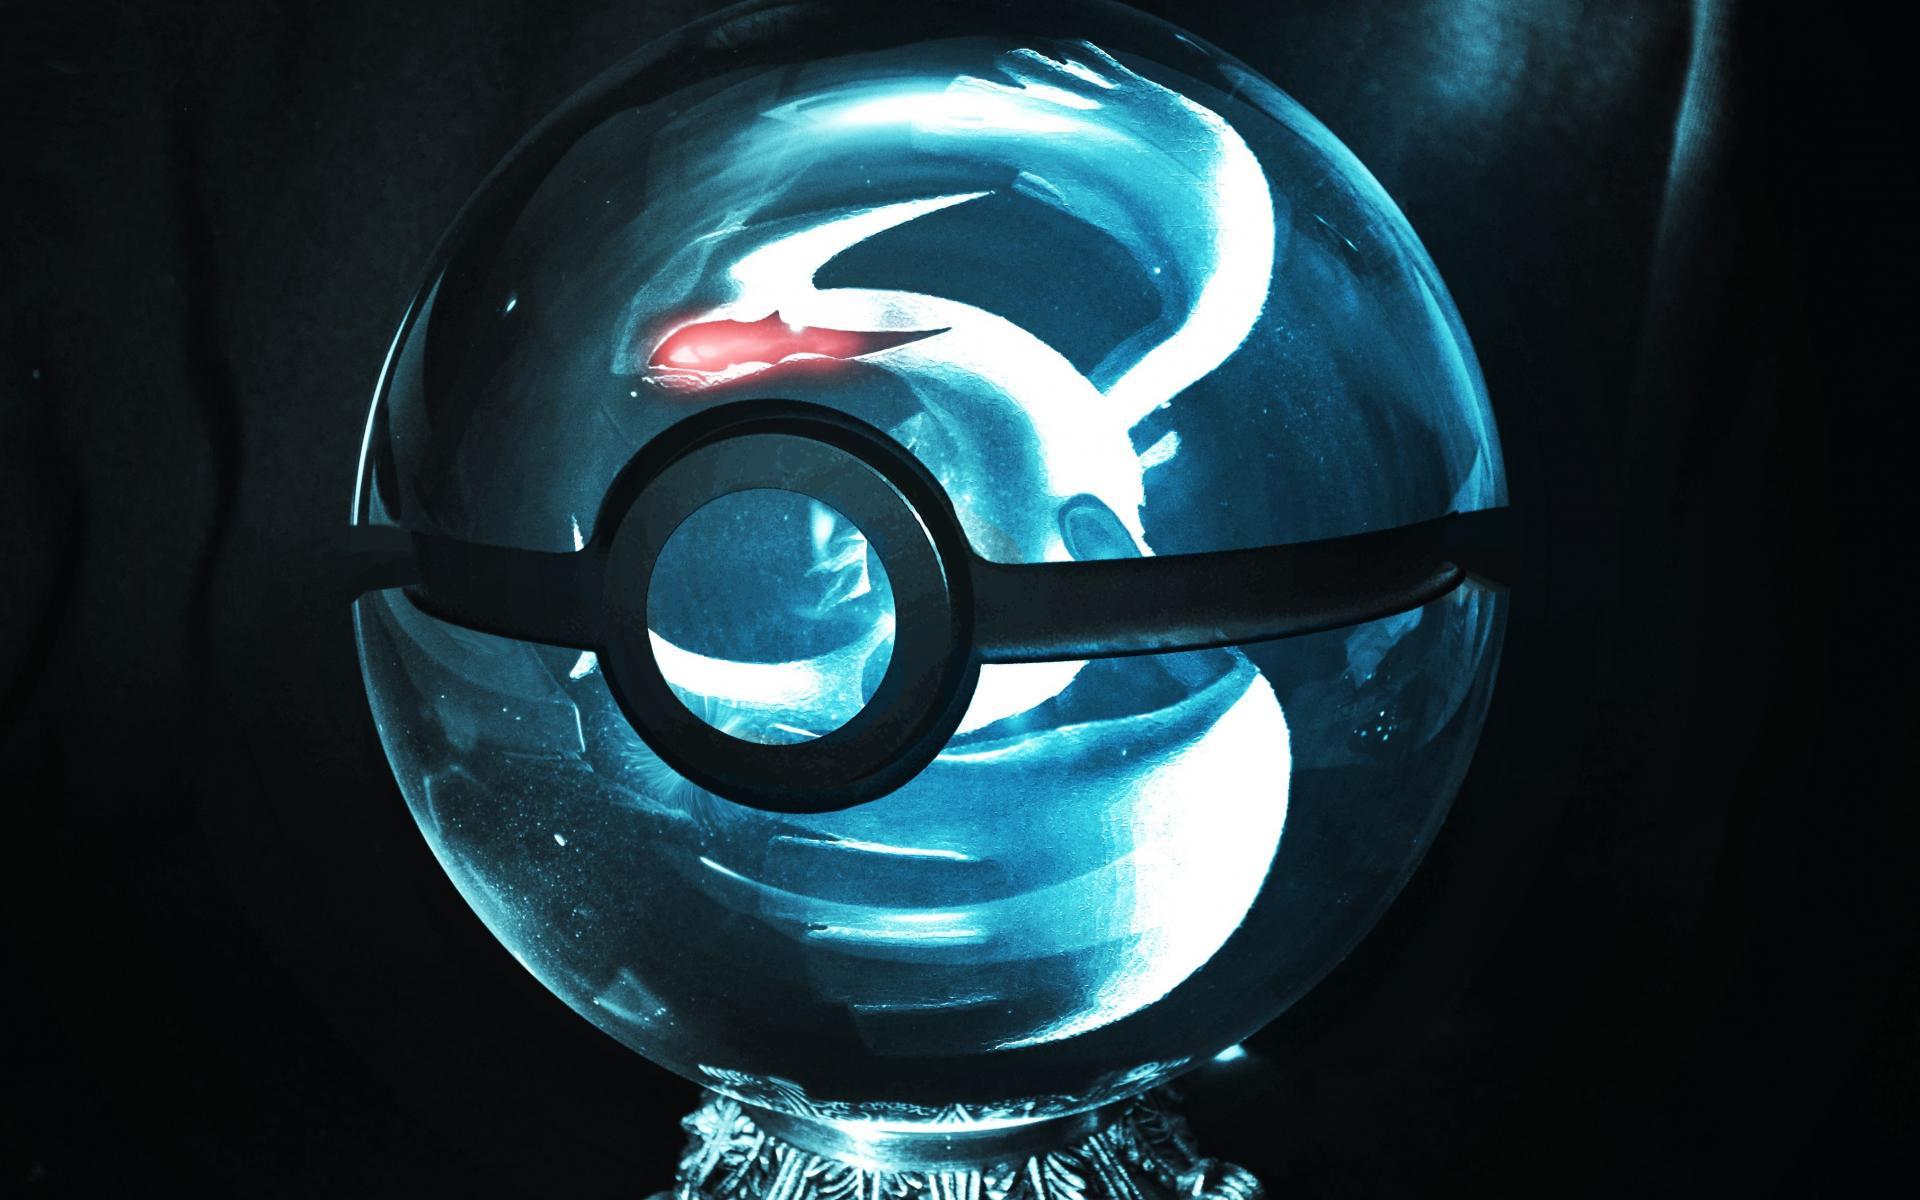 Epic Pokeball Wallpapers - Top Free Epic Pokeball Backgrounds ...